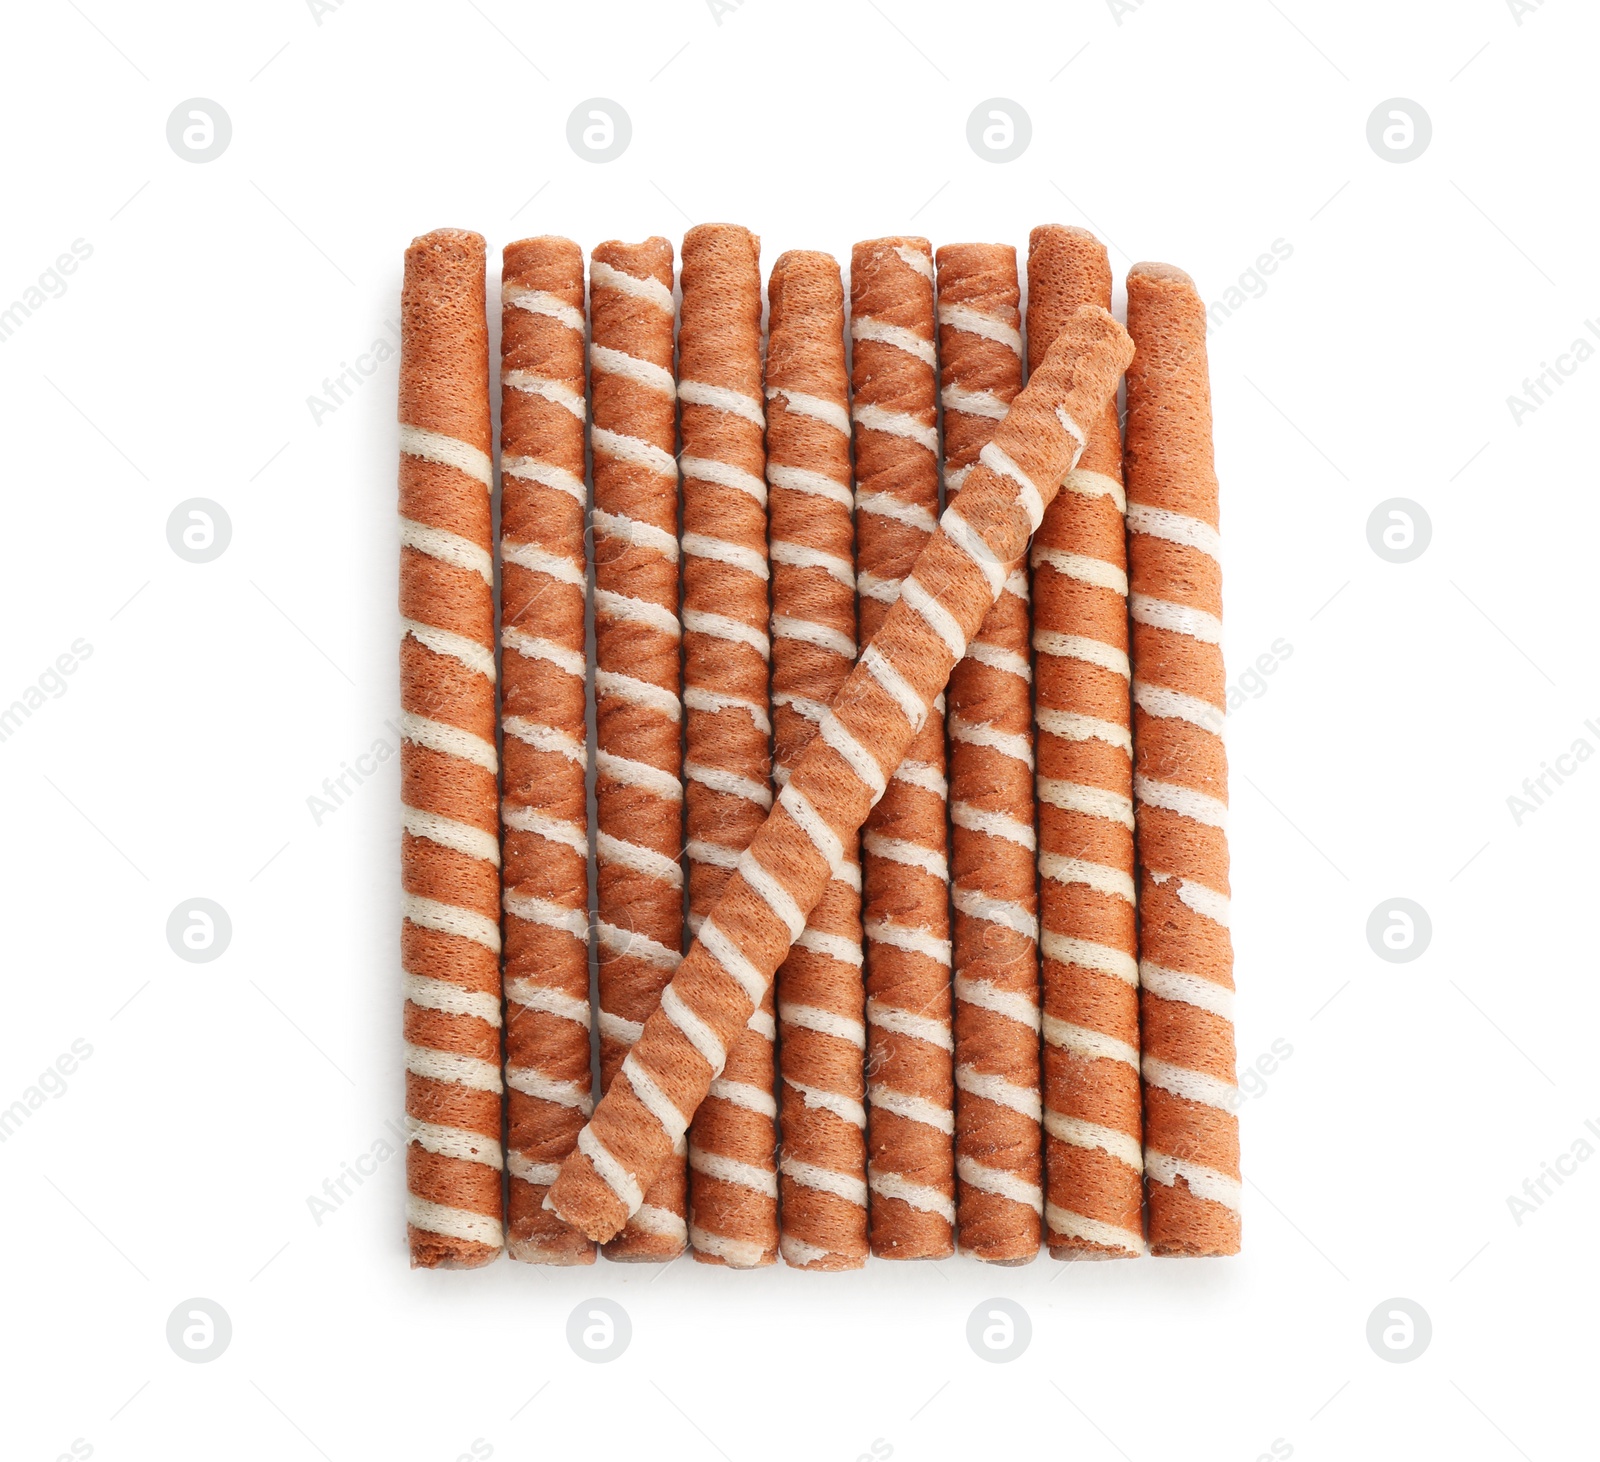 Photo of Delicious chocolate wafer rolls on white background, top view. Sweet food